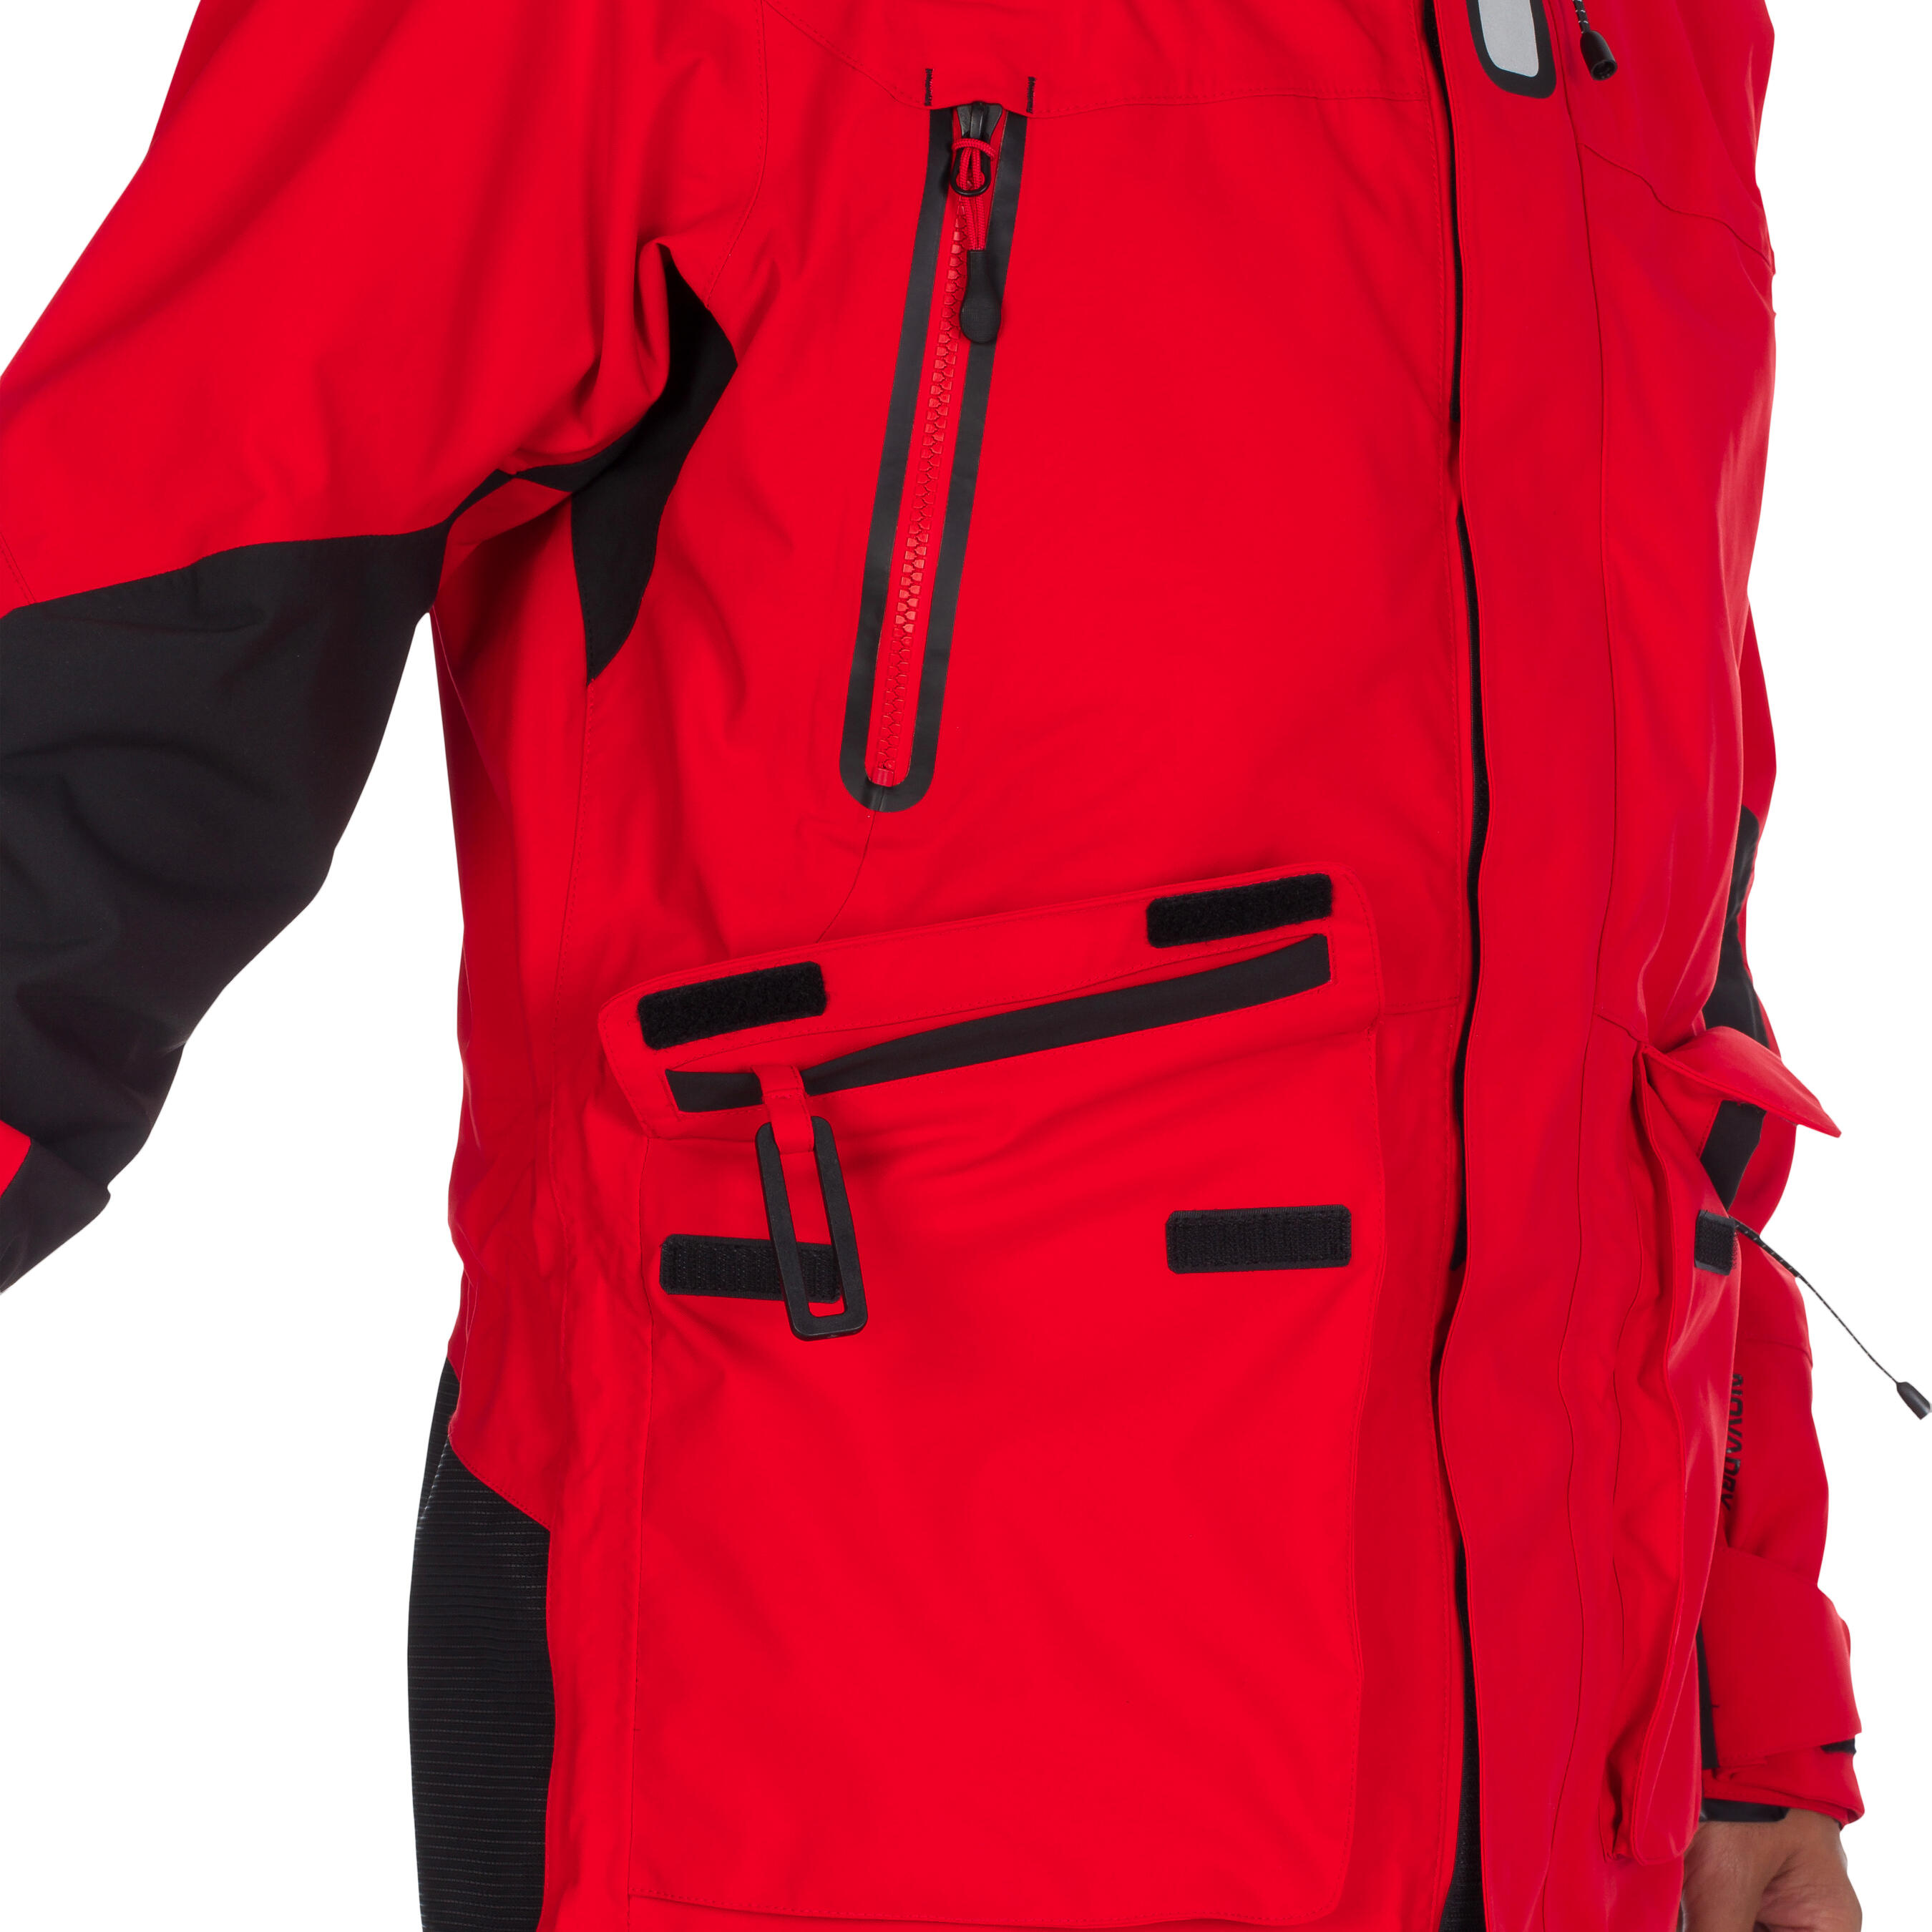 Ozean 900 Men's Waterproof and Breathable Sailing Jacket - Red 16/44